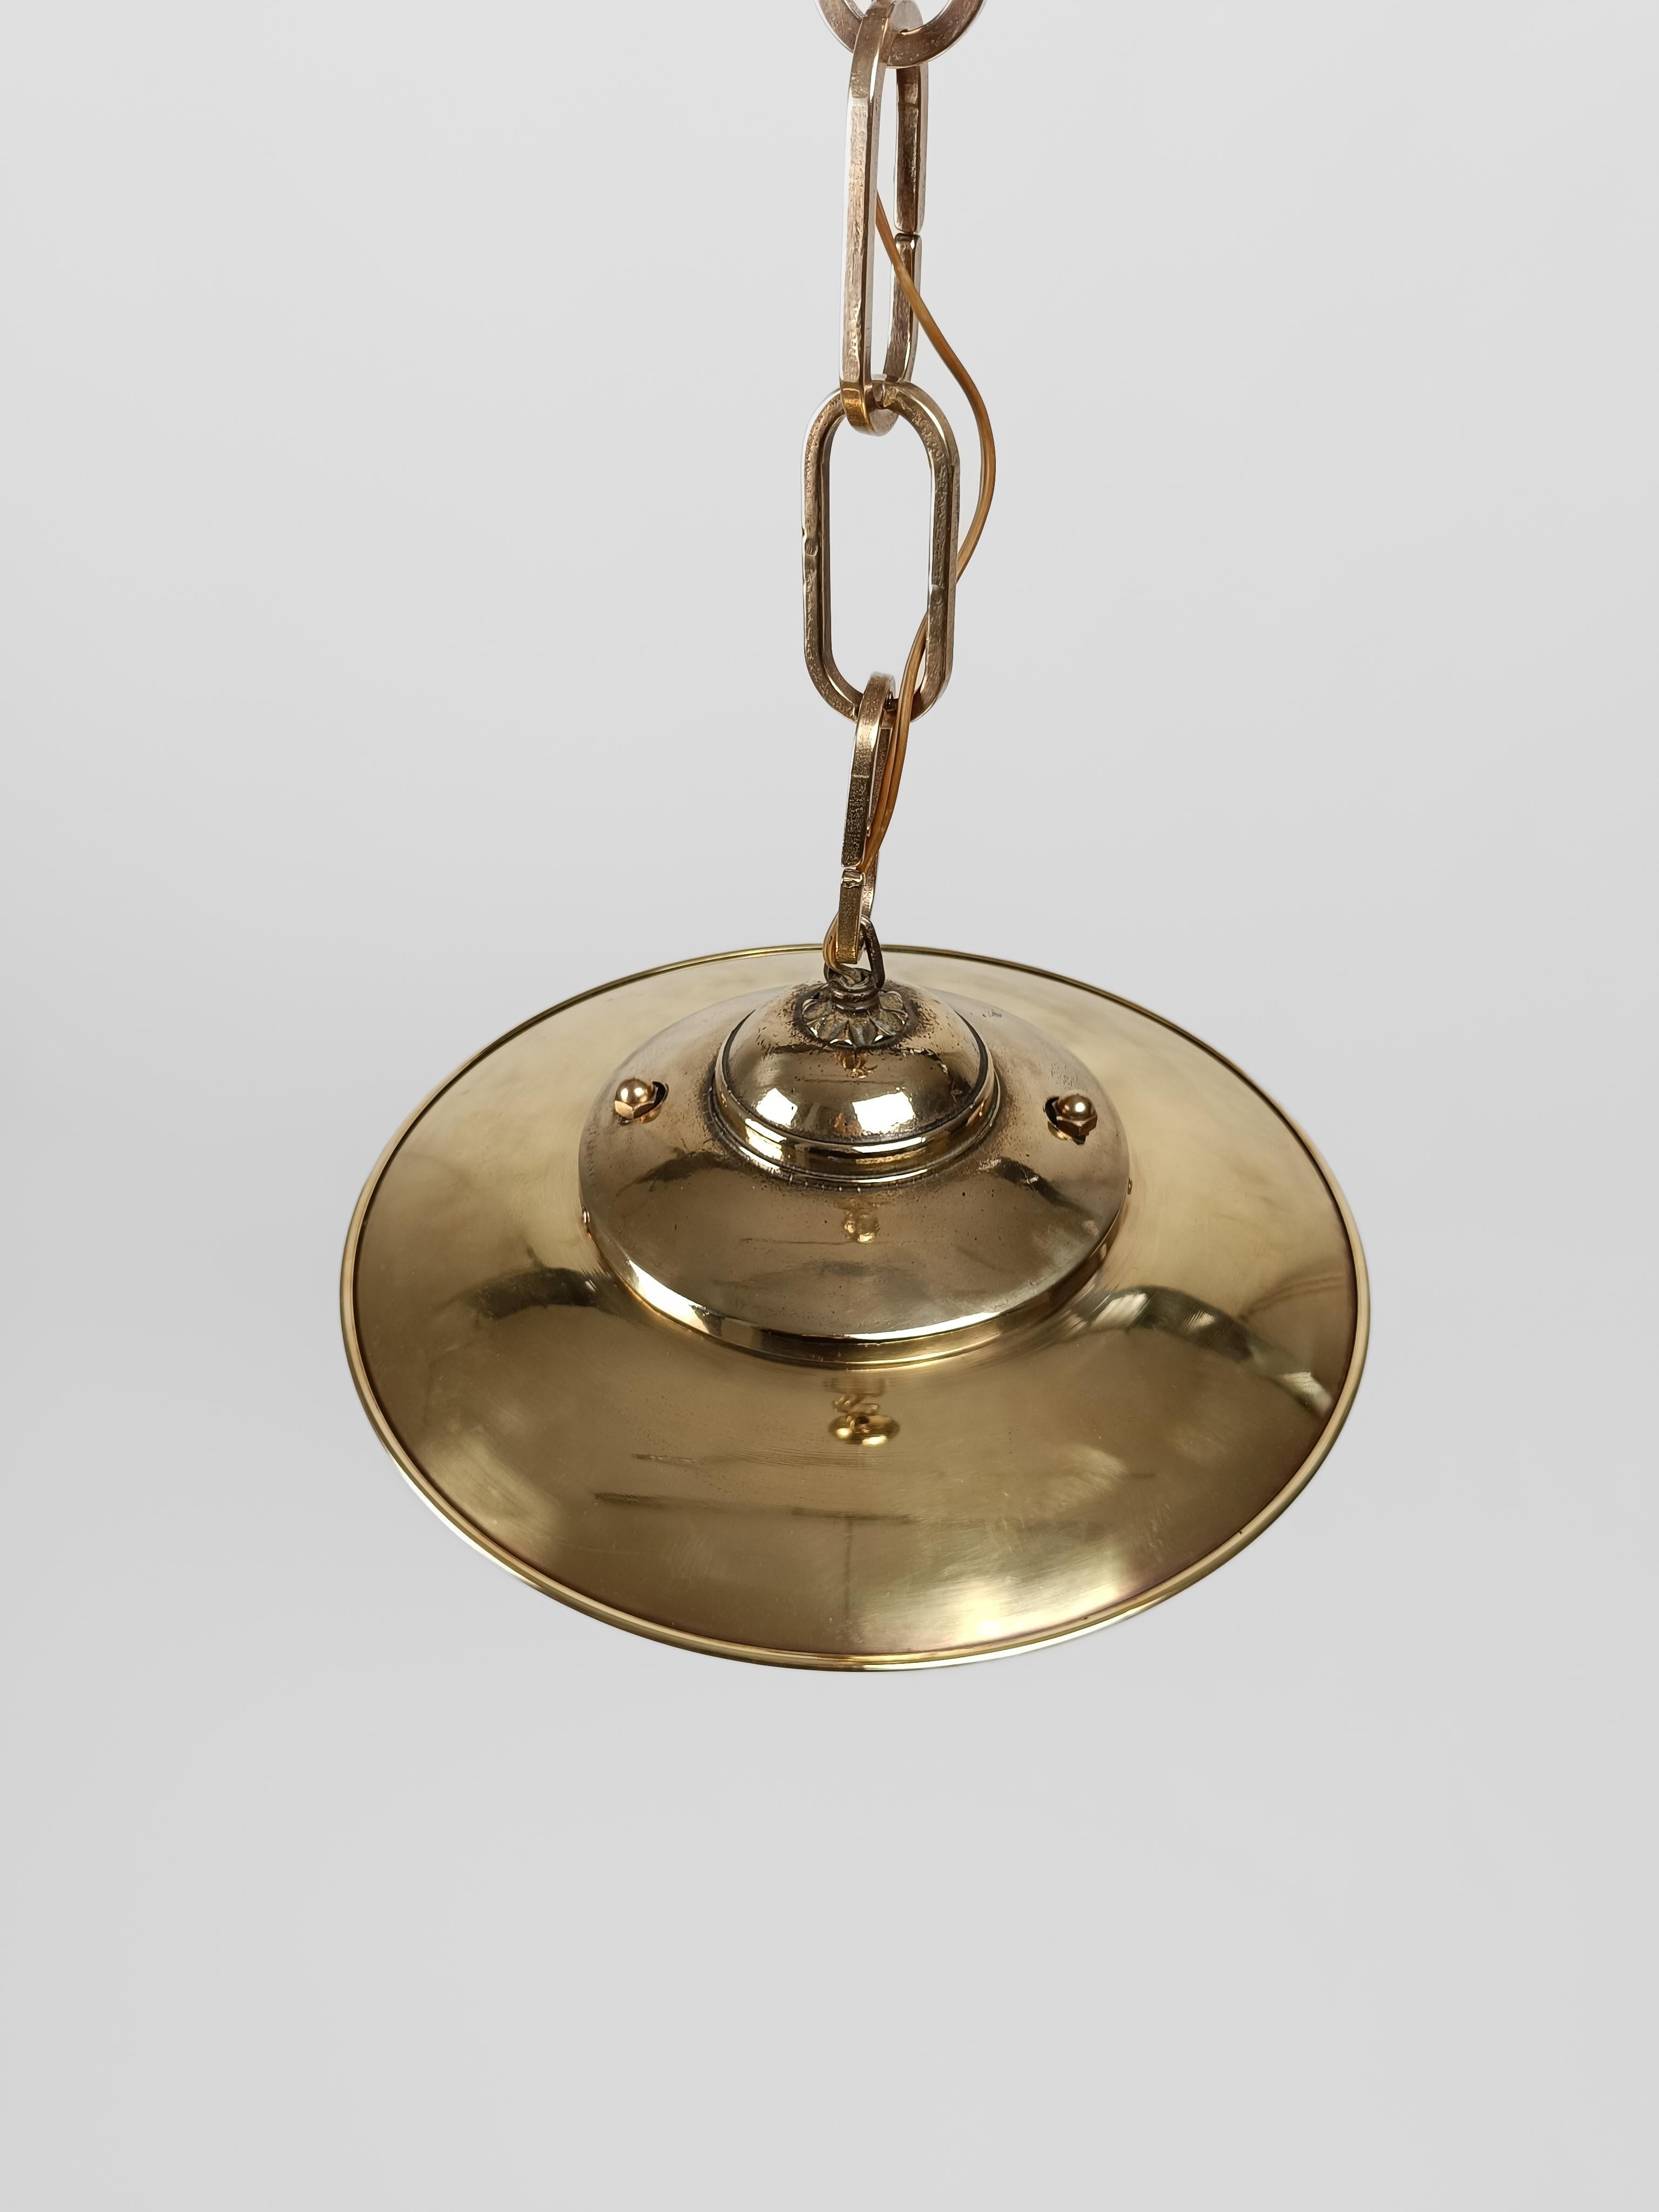 Italian Mid-20th Century Brass Pendant Lamp or Lantern in Nautical Style  For Sale 7